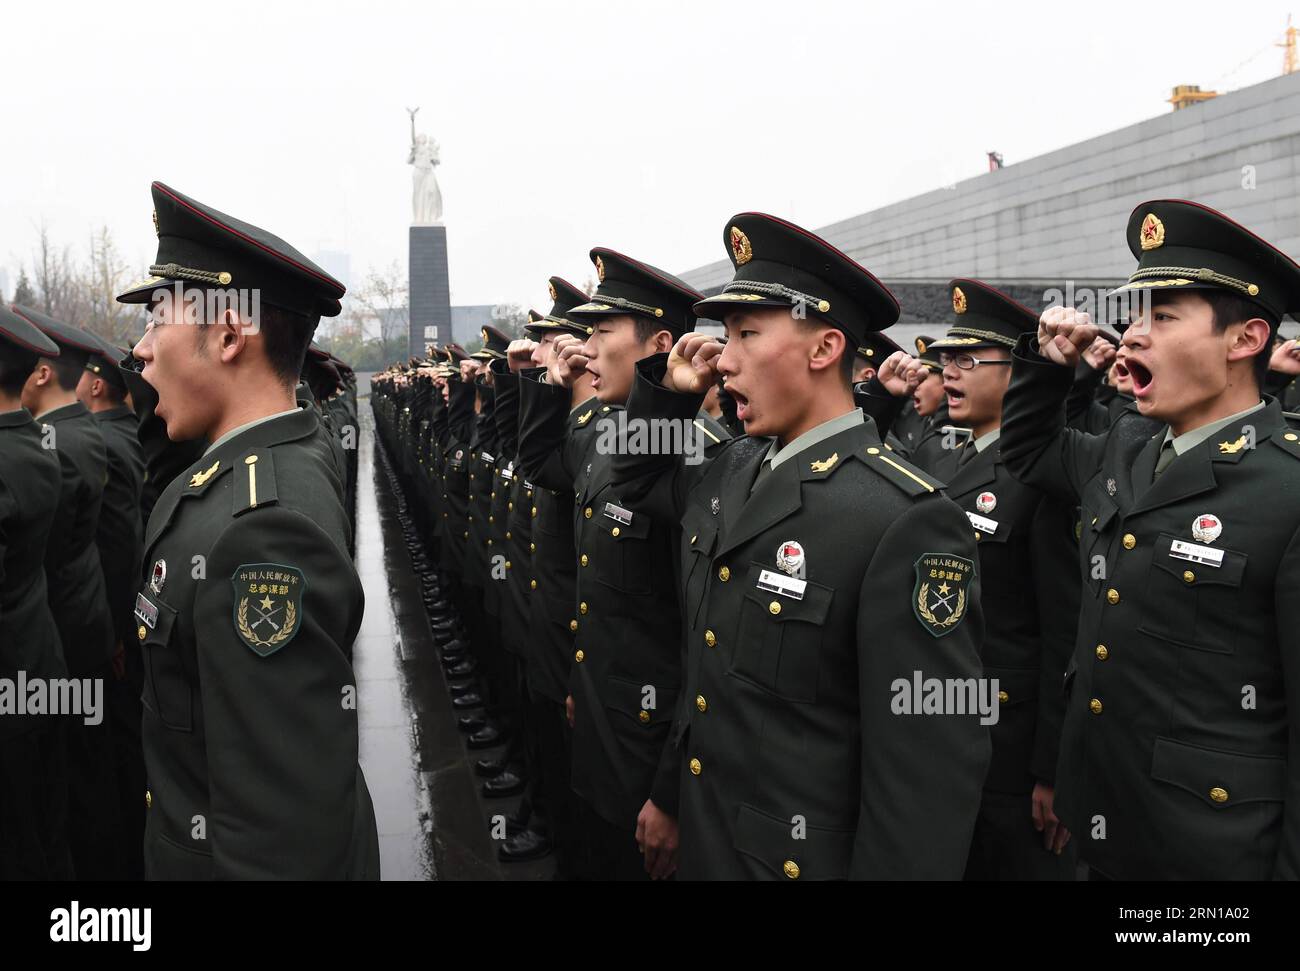 (141210) -- NANJING, Dec. 10, 2014 -- Soldiers of the People s Liberation Army (PLA) swear during a memorial ceremony at the Memorial Hall of the Victims in Nanjing Massacre by Japanese Invaders in Nanjing, Dec. 10, 2014. ) (mp) CHINA-NANJING-MASSACRE-MEMORIAL CEREMONY (CN) SunxCan PUBLICATIONxNOTxINxCHN   Nanjing DEC 10 2014 Soldiers of The Celebrities S Liberation Army PLA Swear during a Memorial Ceremony AT The Memorial Hall of The Victims in Nanjing Massacre by Japanese Invaders in Nanjing DEC 10 2014 MP China Nanjing Massacre Memorial Ceremony CN  PUBLICATIONxNOTxINxCHN Stock Photo